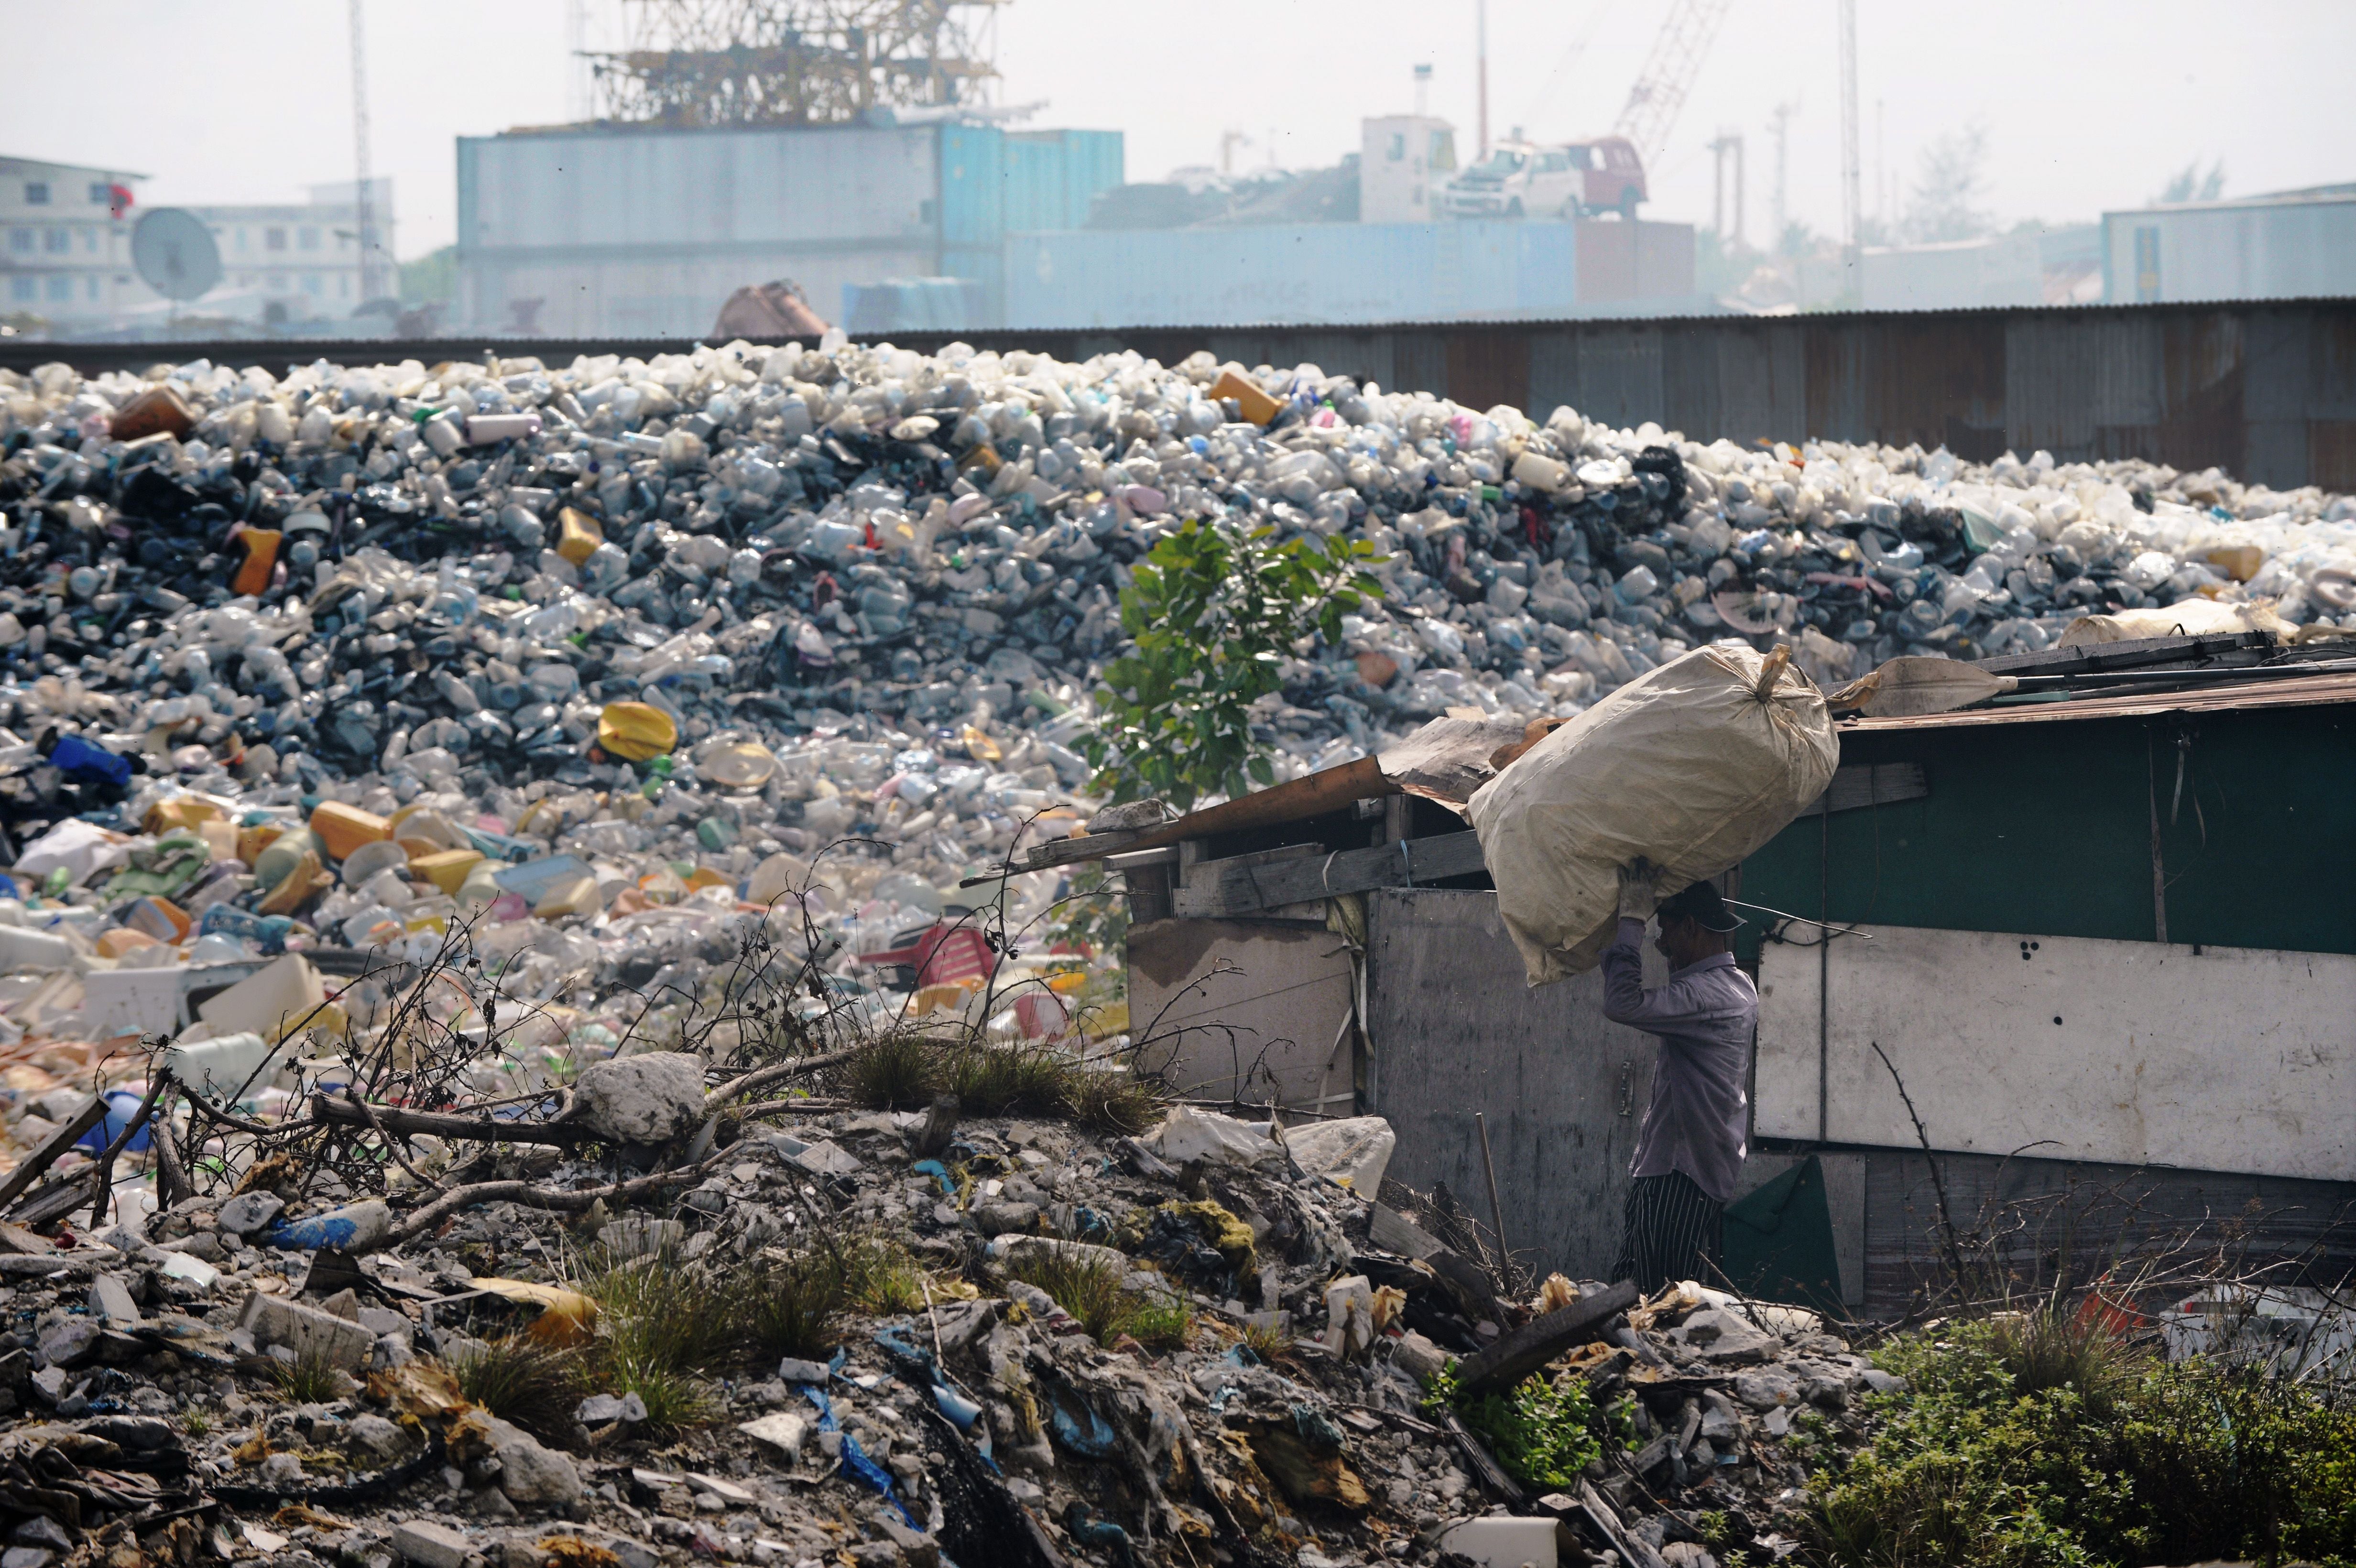 In this September 2013 photo, a Bangladeshi immigrant named Fusin carries a sack of recyclables. (Photo: Roberto Schmidt/AFP, Getty Images)